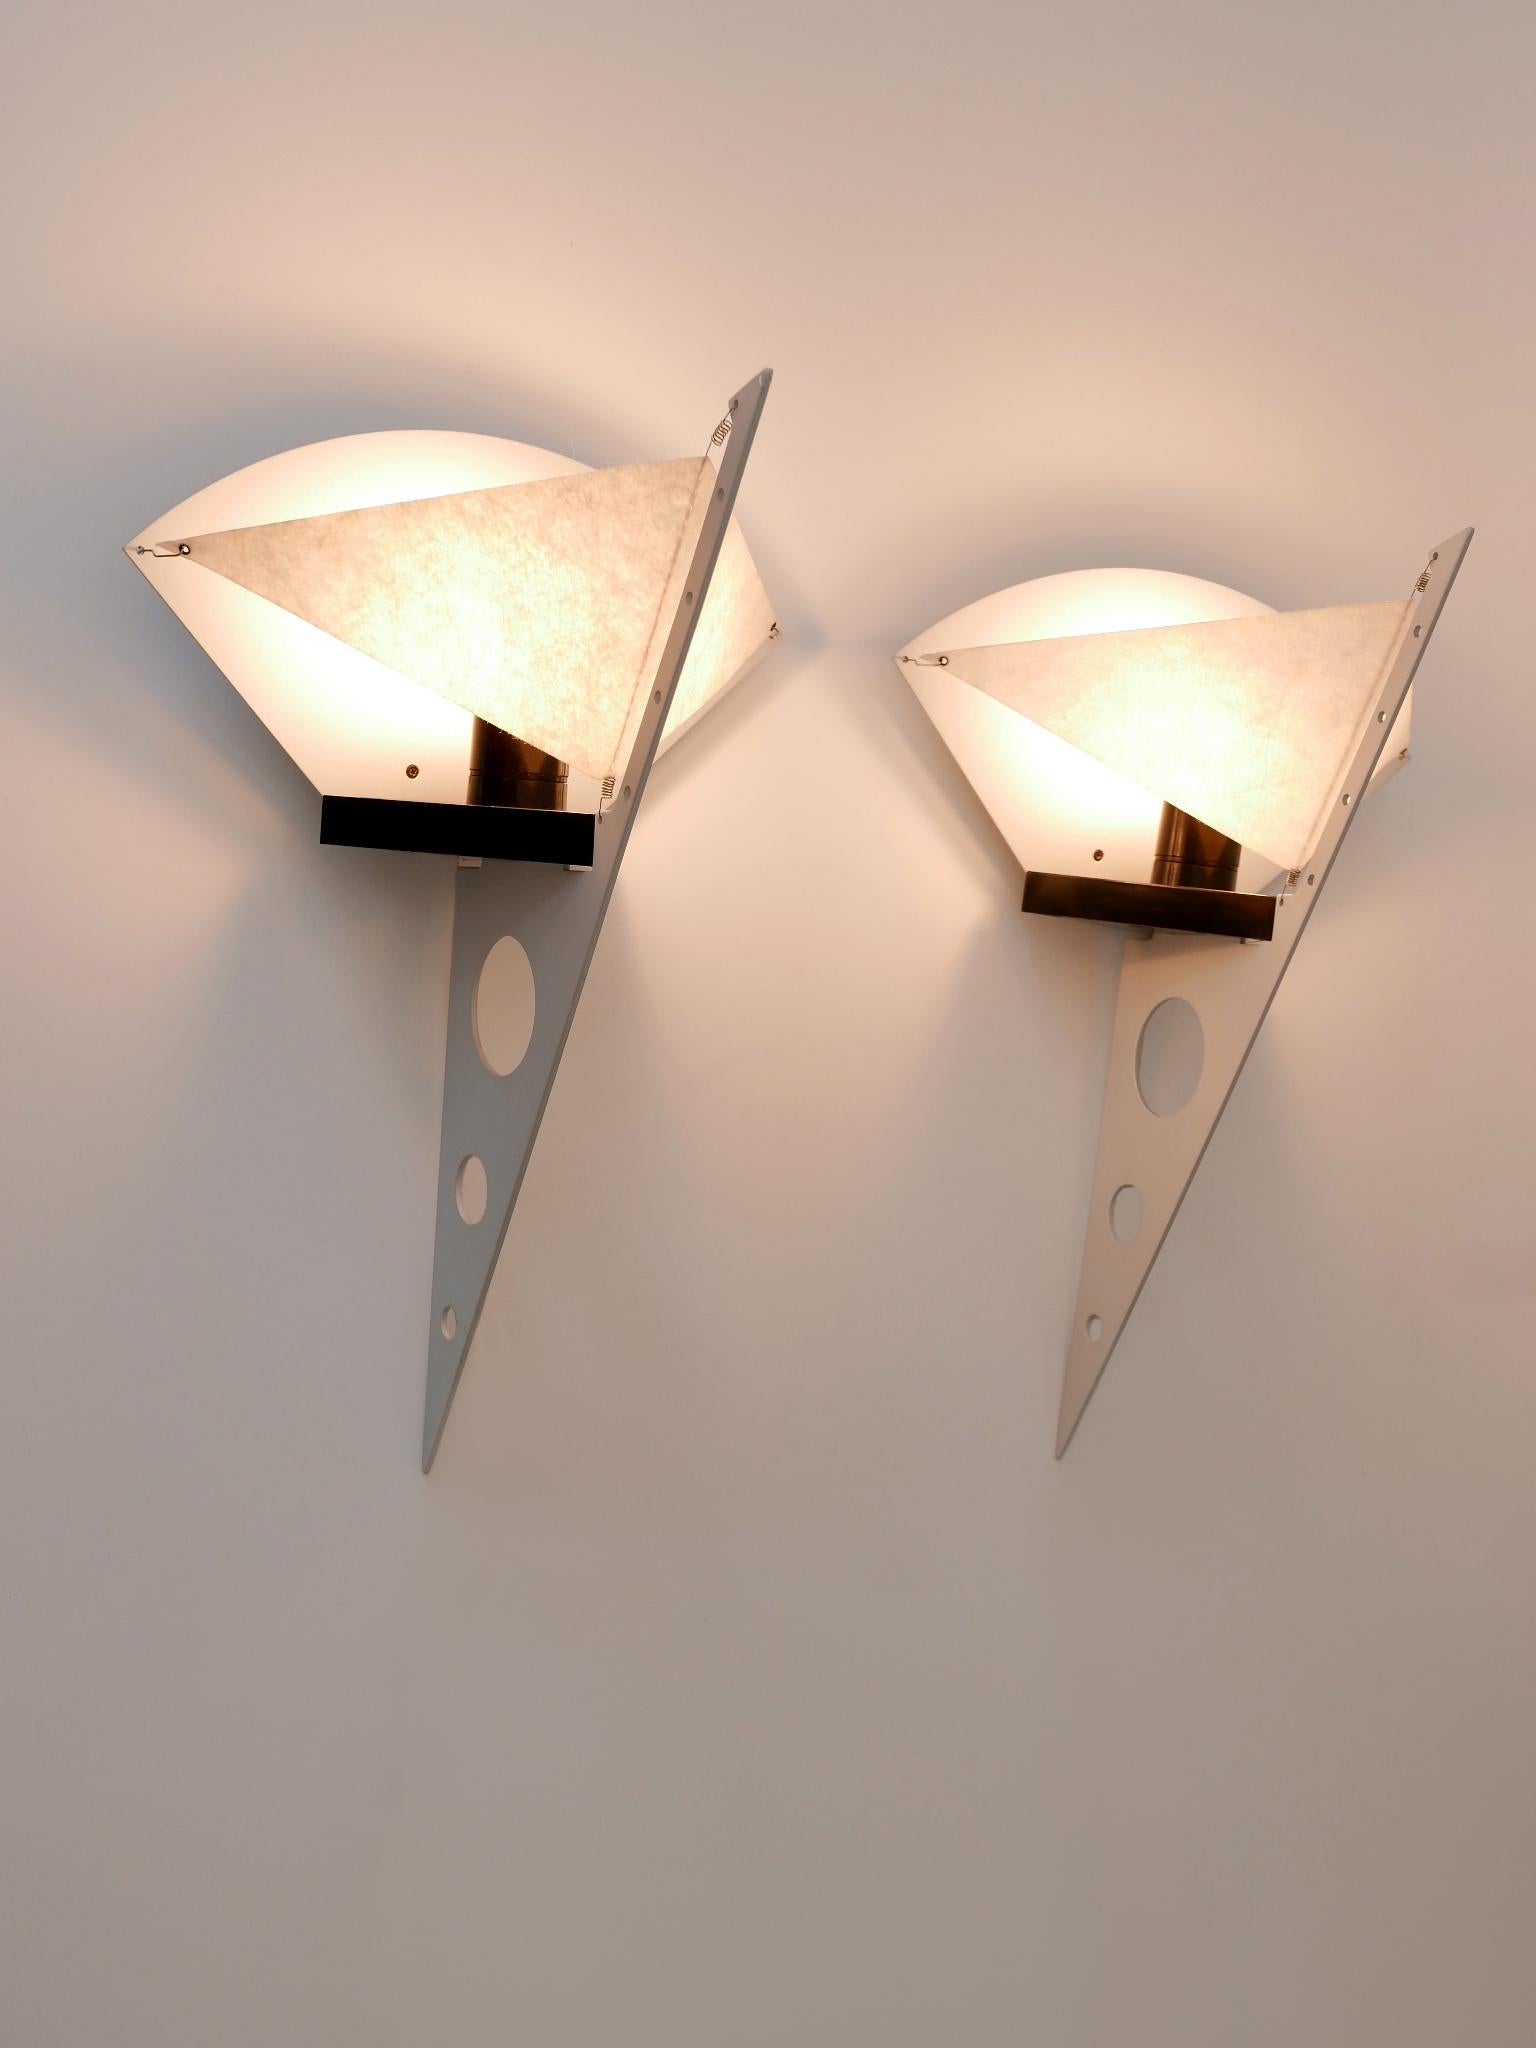 Set of two amazing Post-Modern sconces or candle holders 'Filicudara'. Designed by Steven Lombardi for Artemide, Italy, 1980s. Makers mark on each sconce.

Each of the sconces will be delivered with the matching part to use them as wall candle